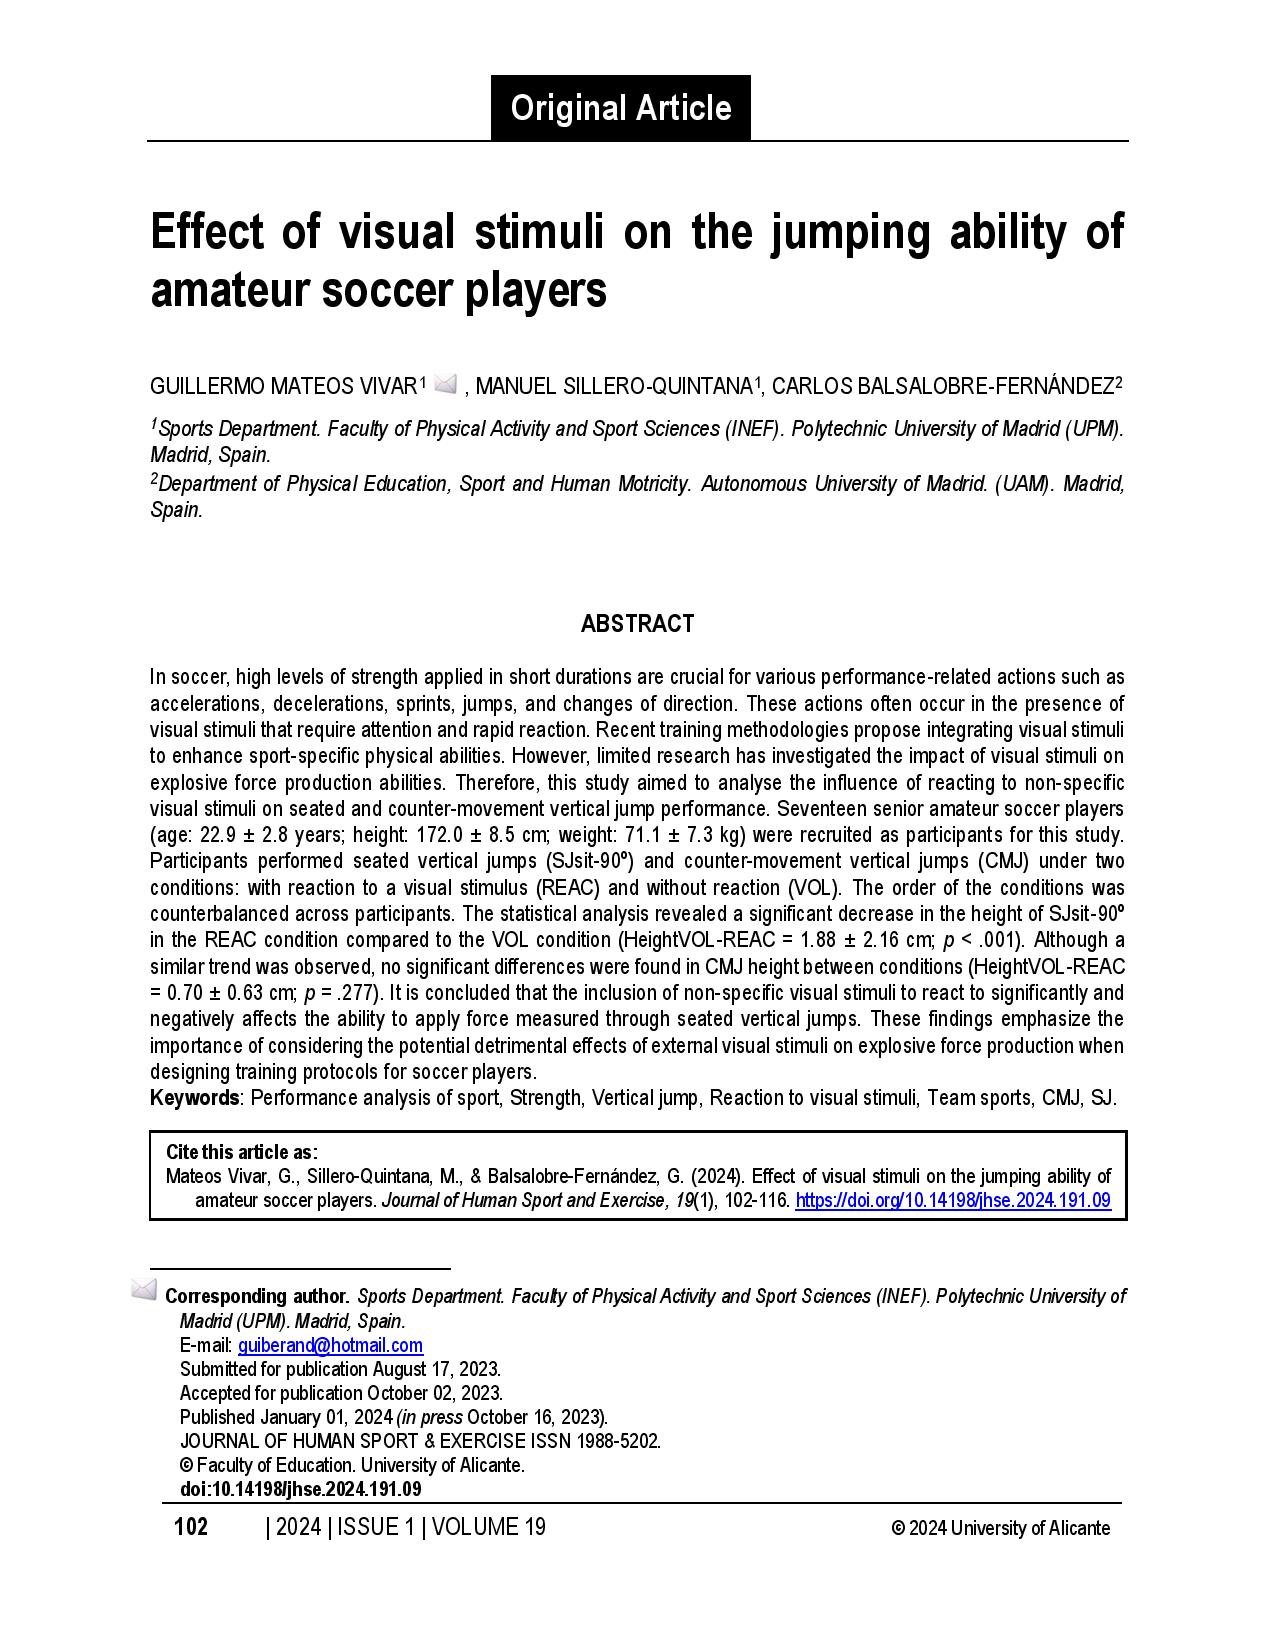 Effect of visual stimuli on the jumping ability of amateur soccer players